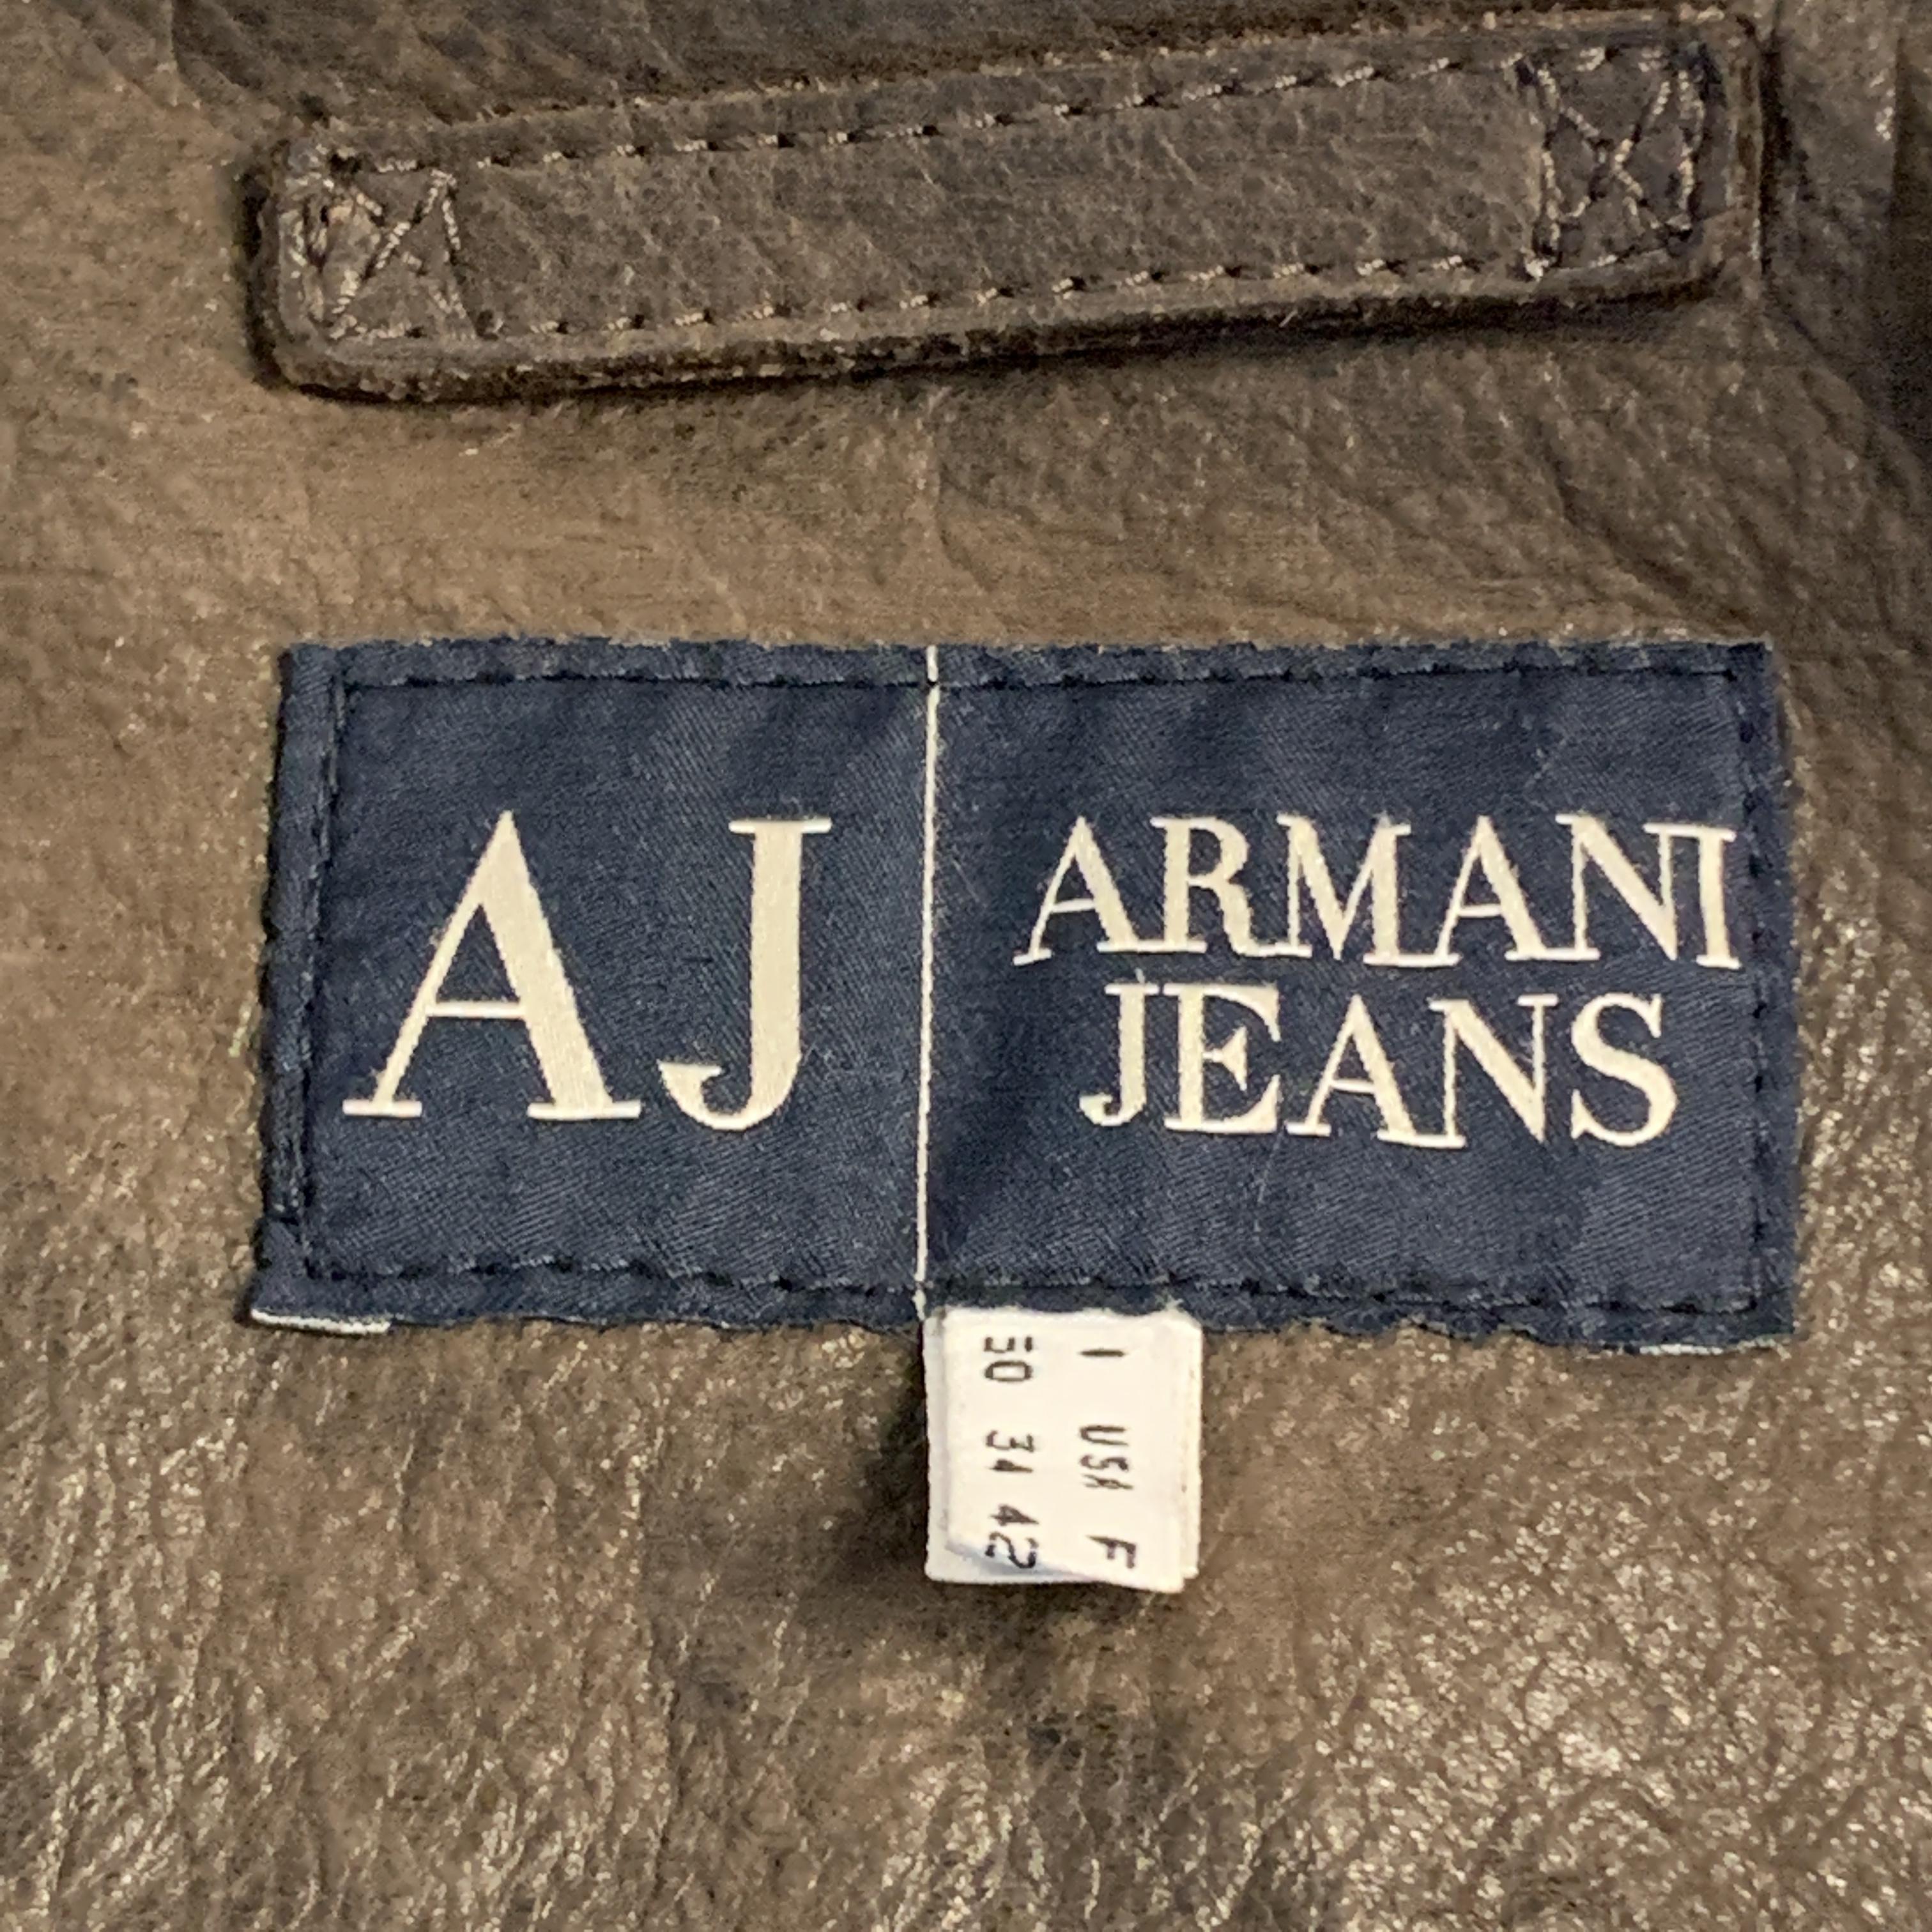 ARMANI JEANS Size S Brown Leather Zip Up Distressed Jacket 5